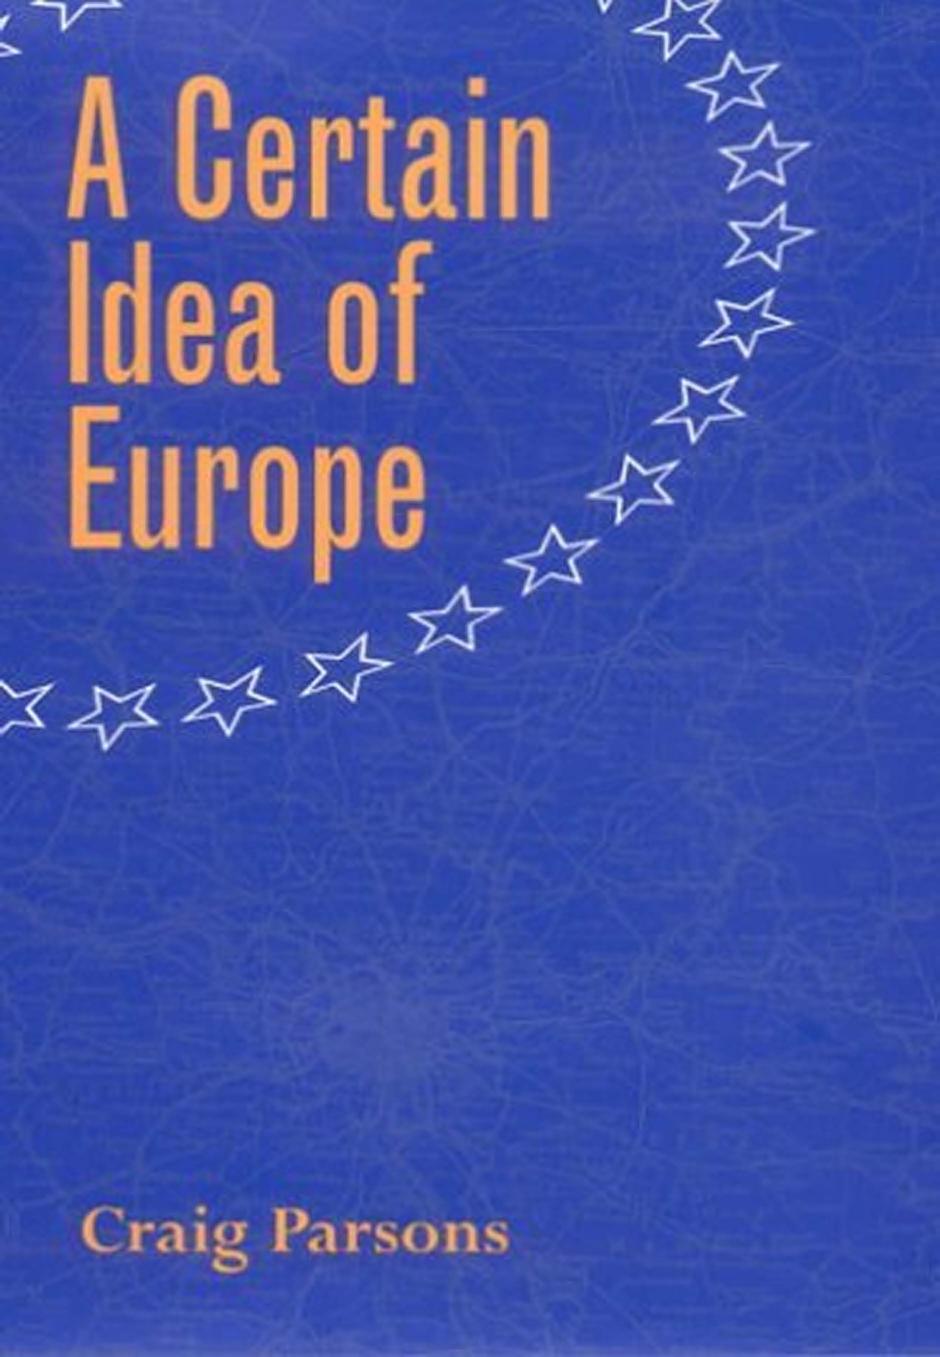 A Certain Idea of Europe by Craig Parsons